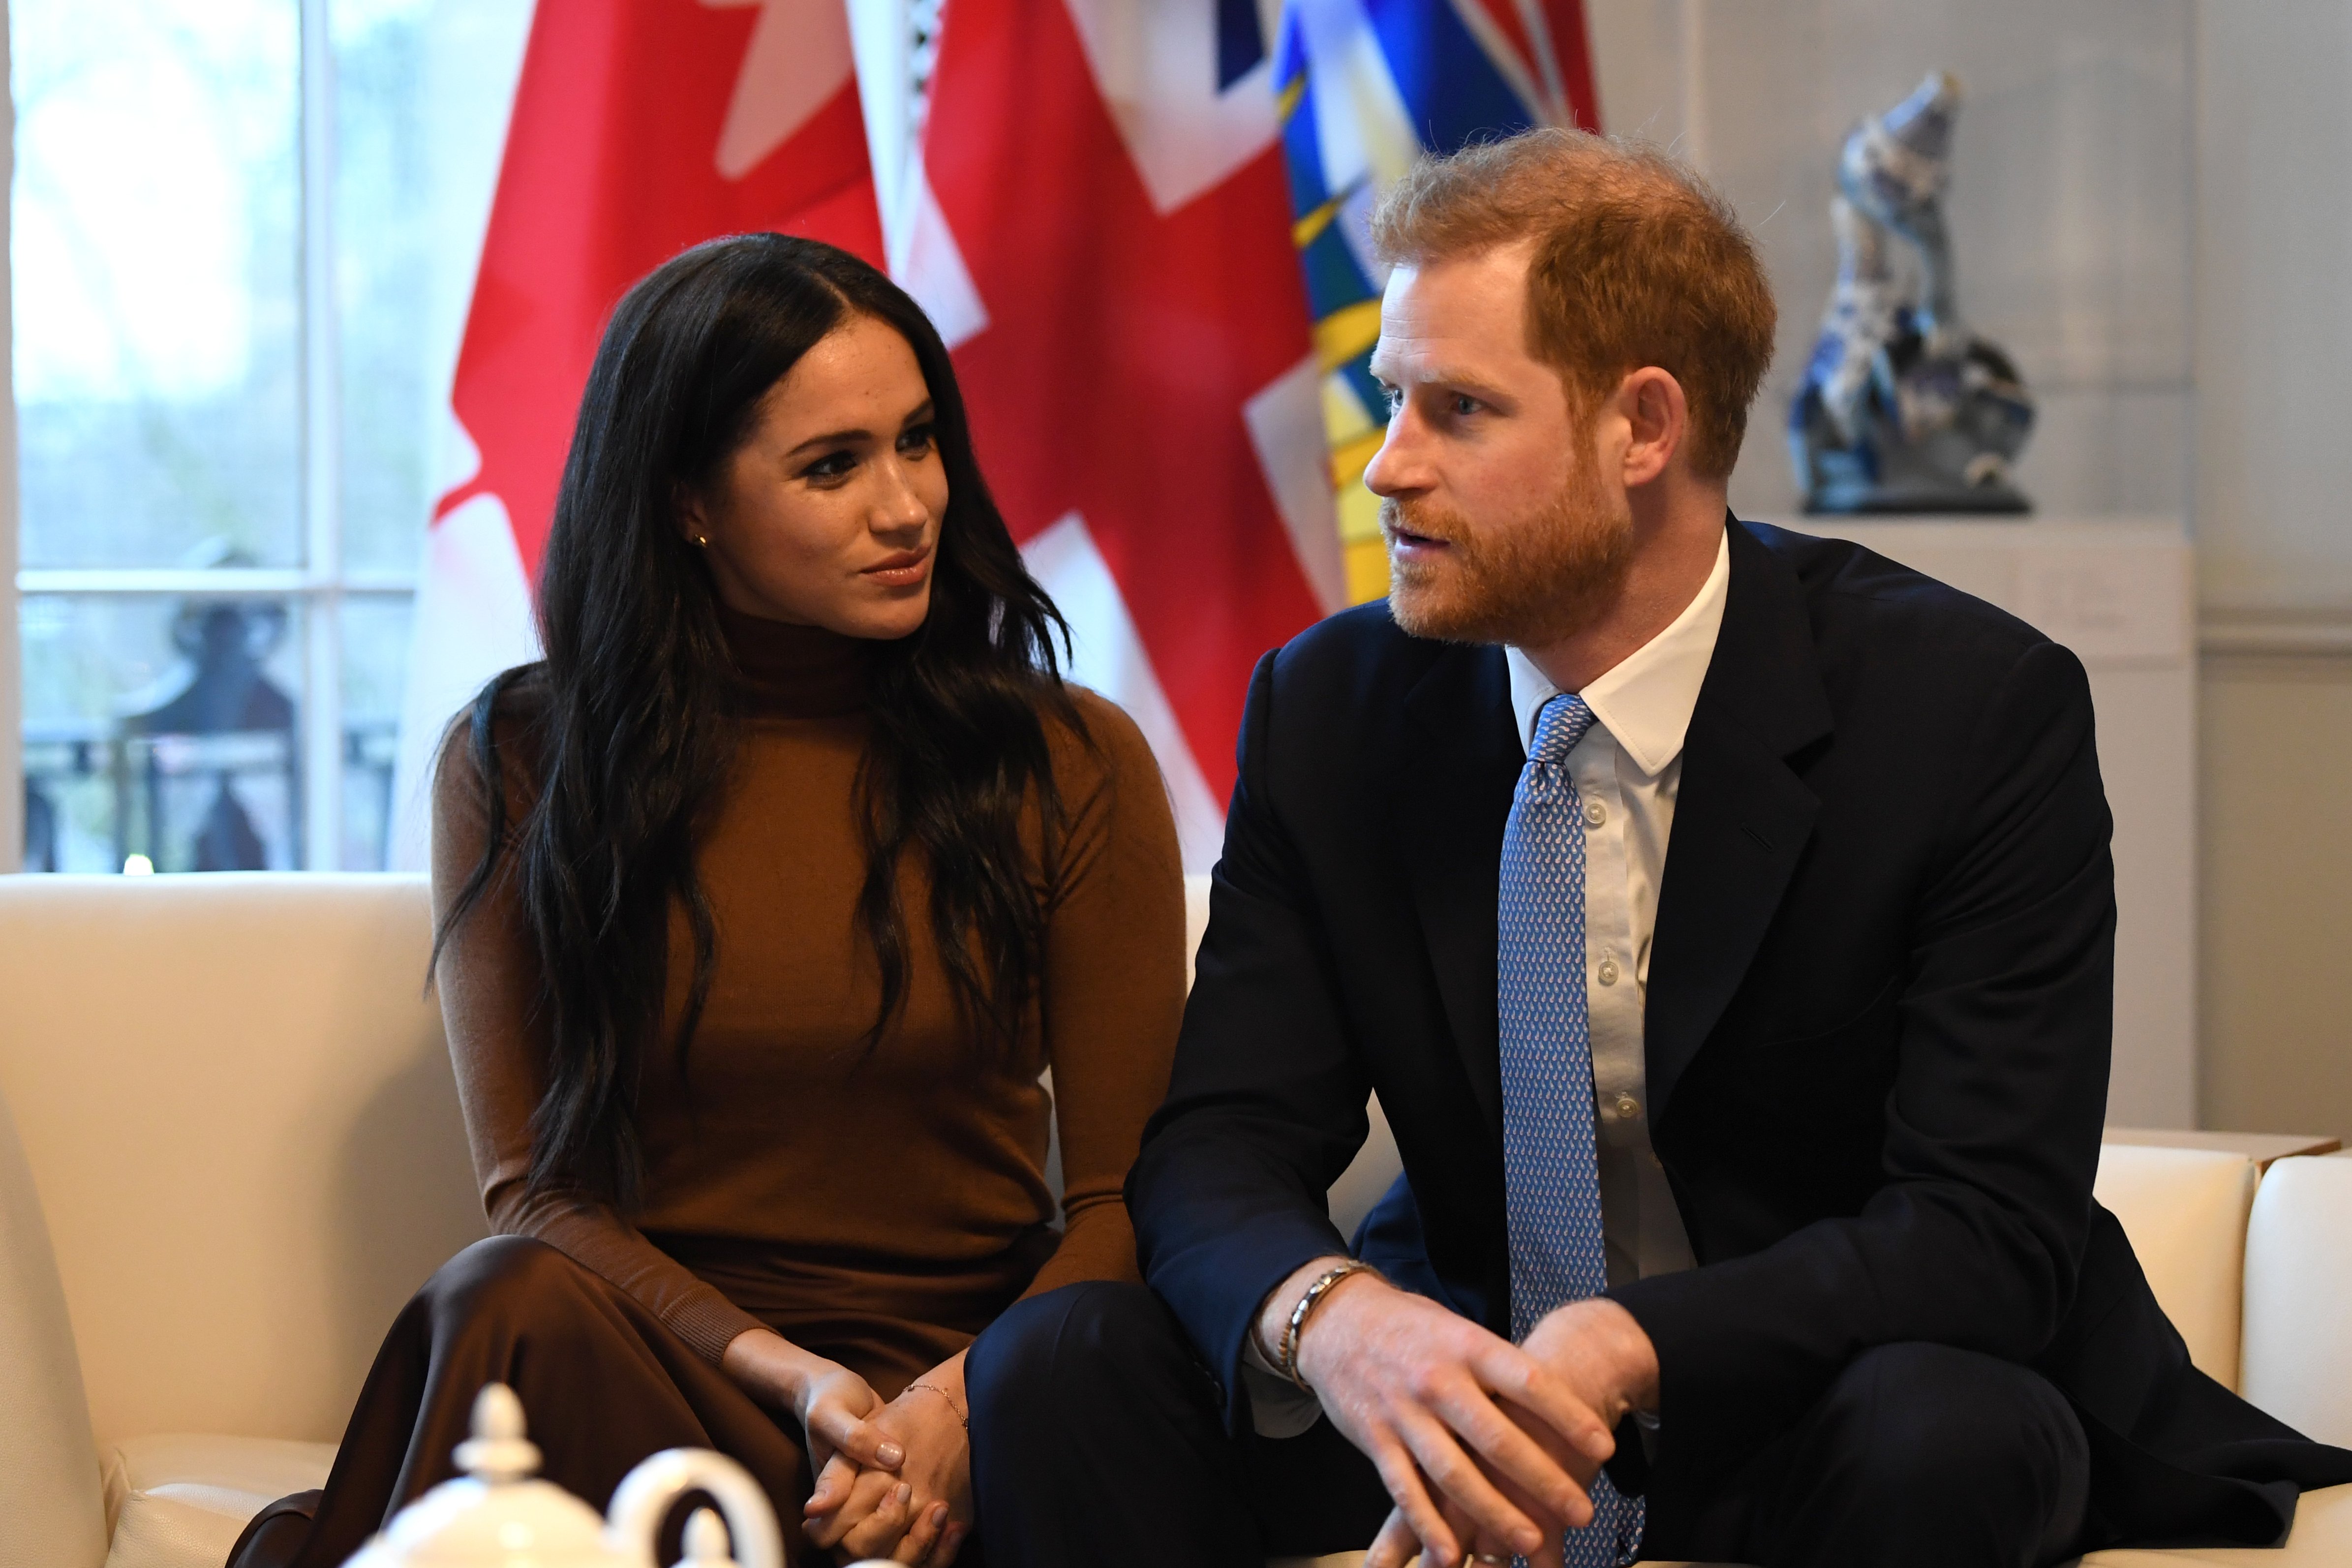 Prince Harry and Meghan at Canada House on January 7, 2020, in London, England | Photo: Getty Images